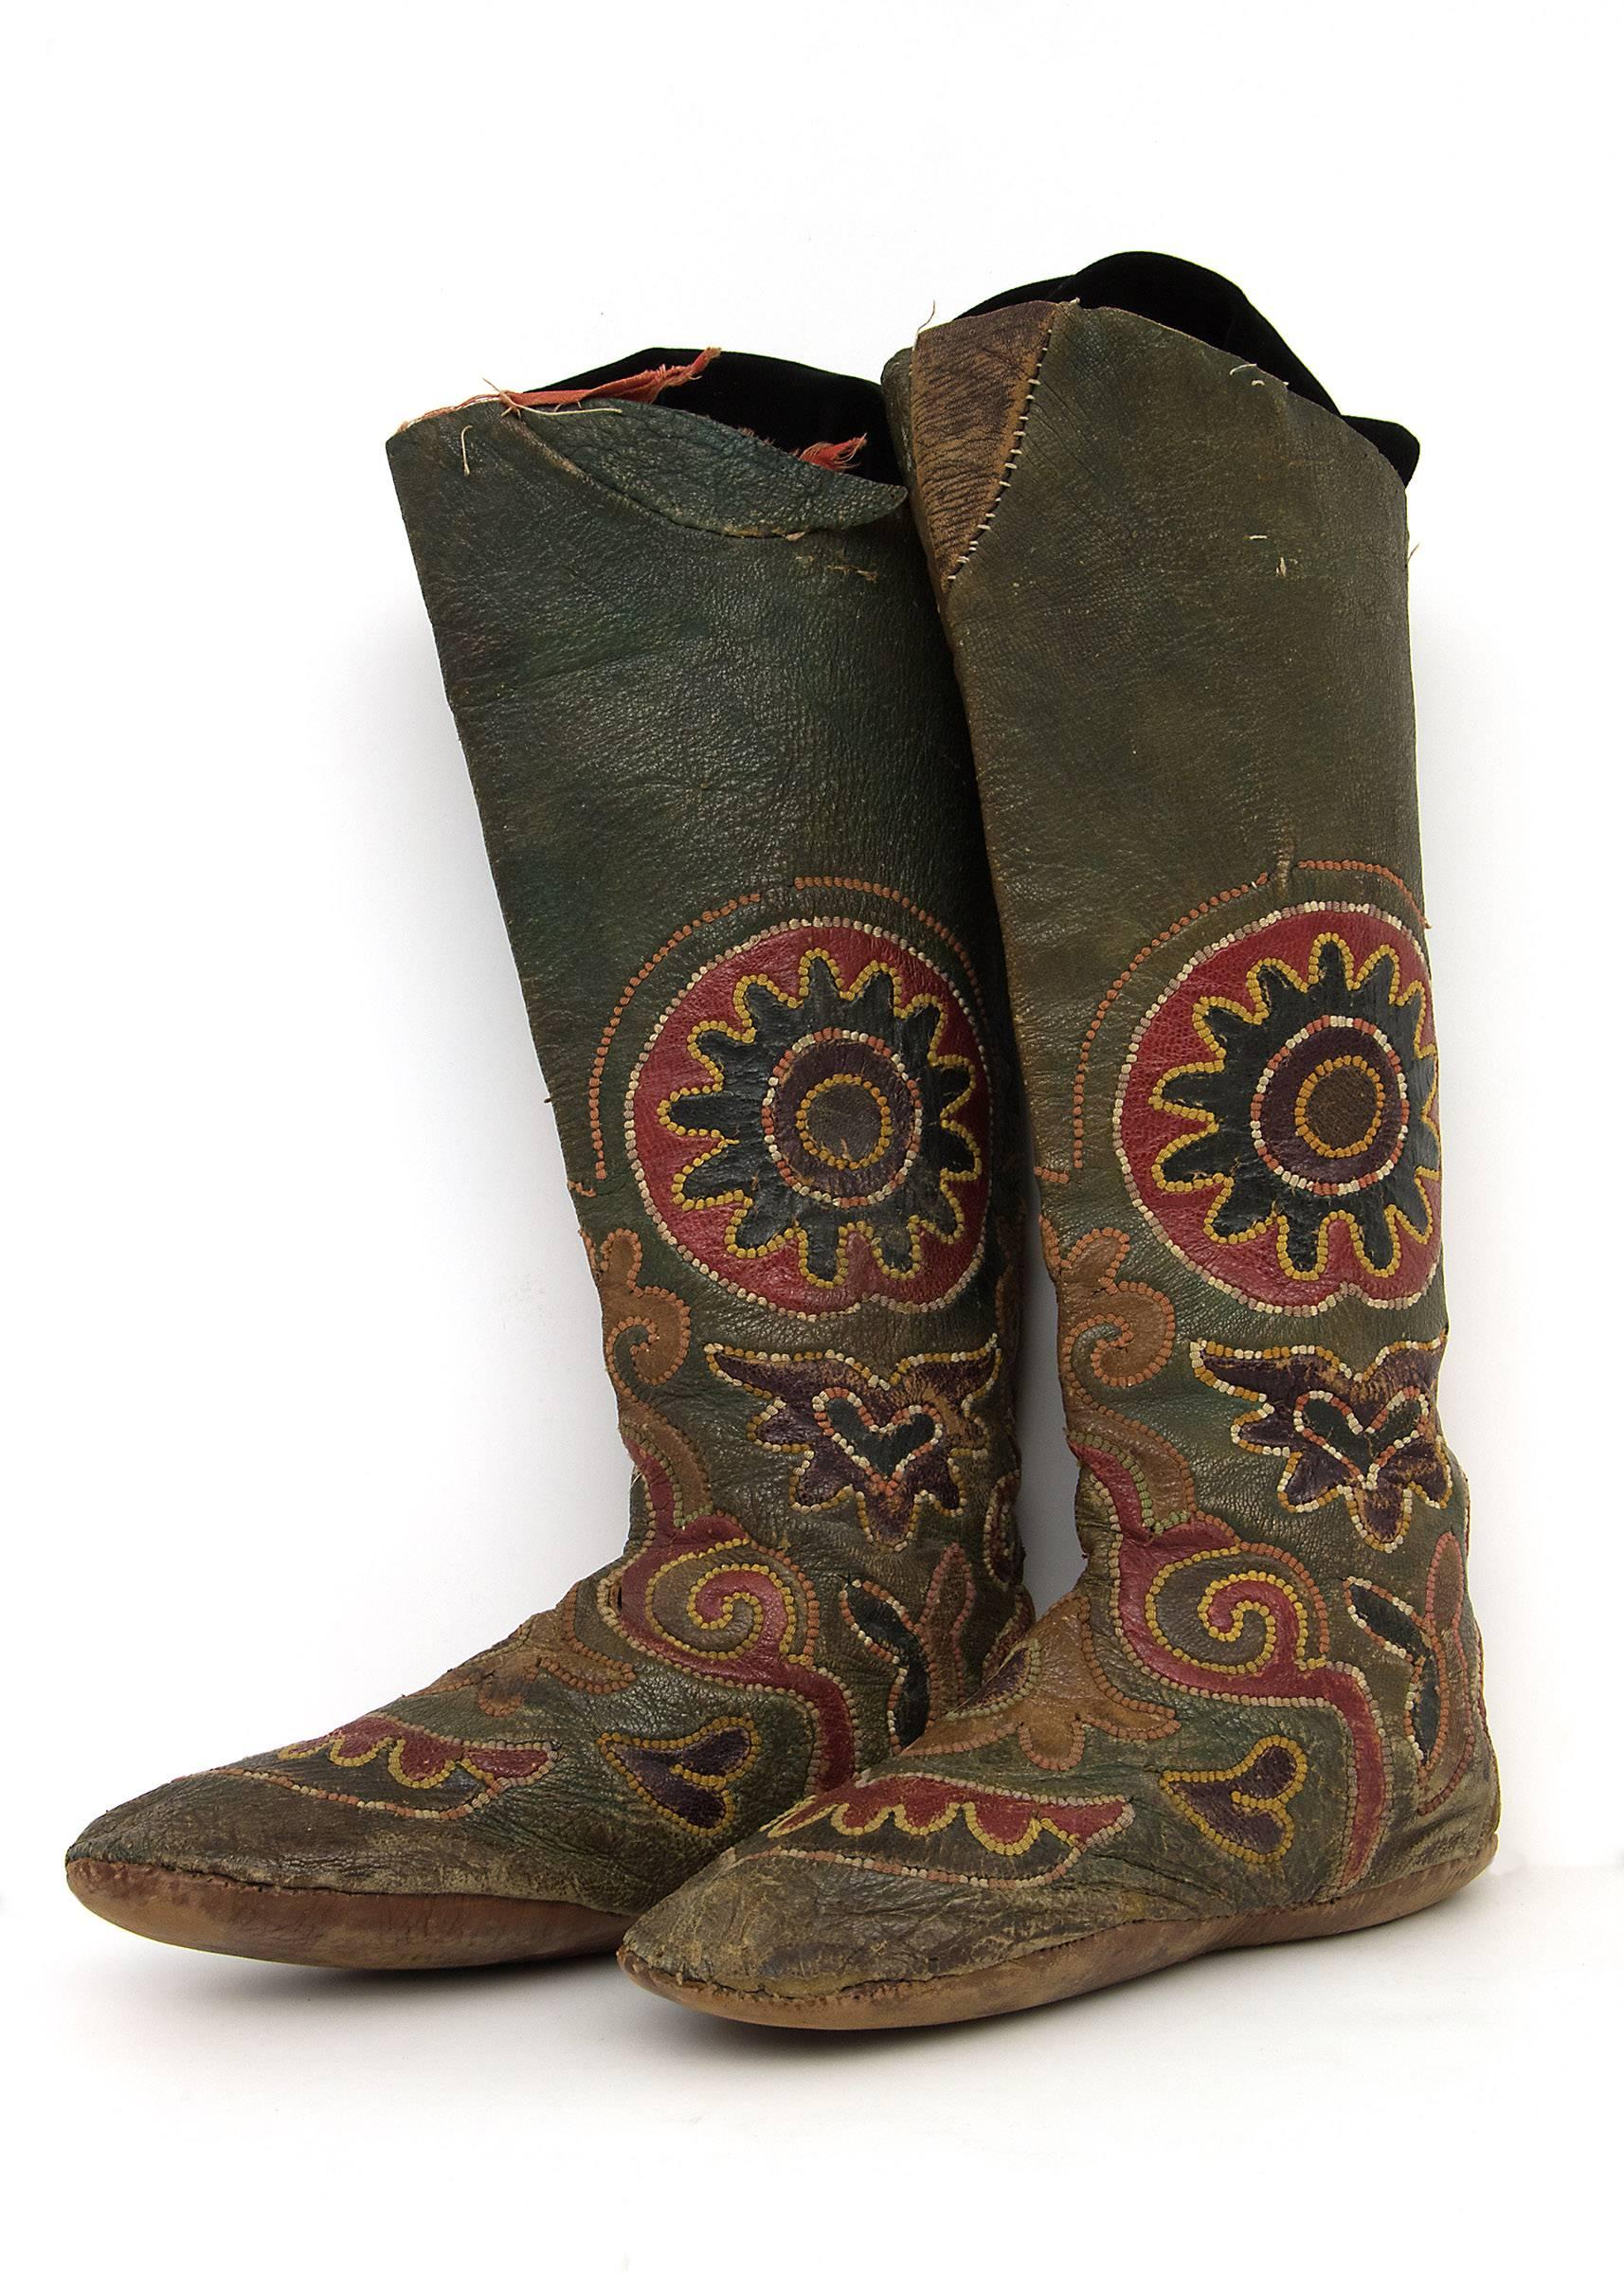 Antique Embroidered Kirghiz Riding Boots originating from Kyrgyzstan in Central Asia.  Likely created between 1900 - 1930s.